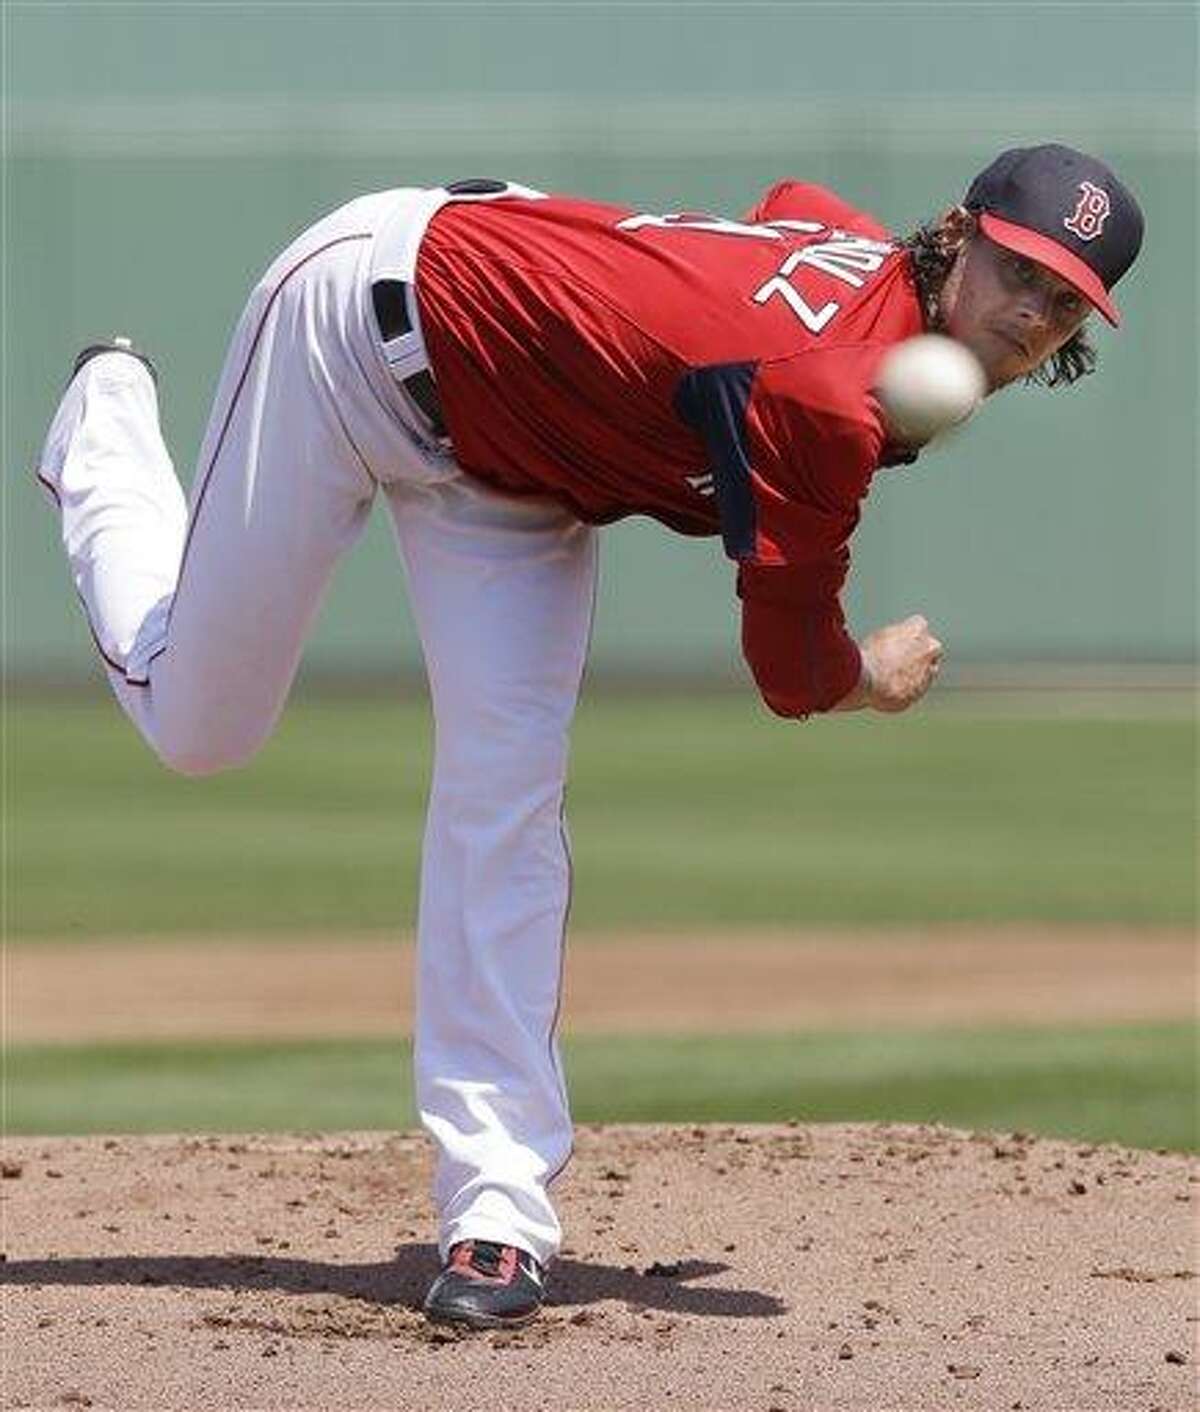 Boston Red Sox starting pitcher Clay Buchholz delivers to the Pittsburgh Pirates in the first inning of an exhibition spring training baseball game in Fort Myers, Fla., Saturday, March 23, 2013. (AP Photo/Elise Amendola)